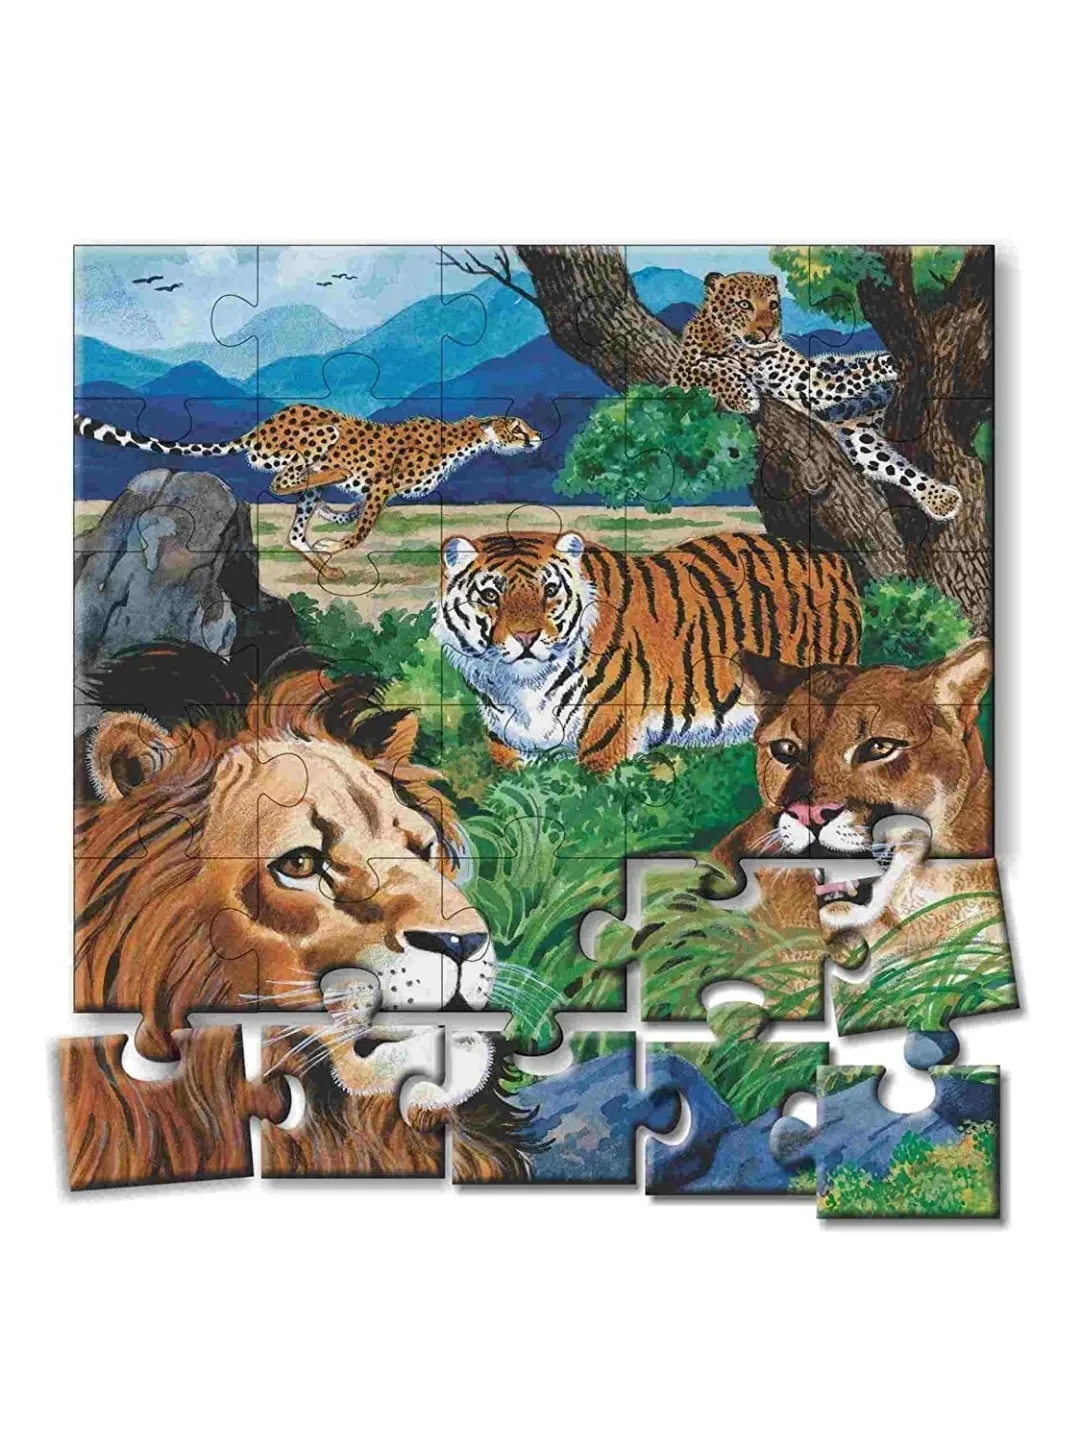 Creatives Animal Puzzles No.6 Multi Colour Jigsaw Puzzles 4 Puzzles  With Poster to Colour